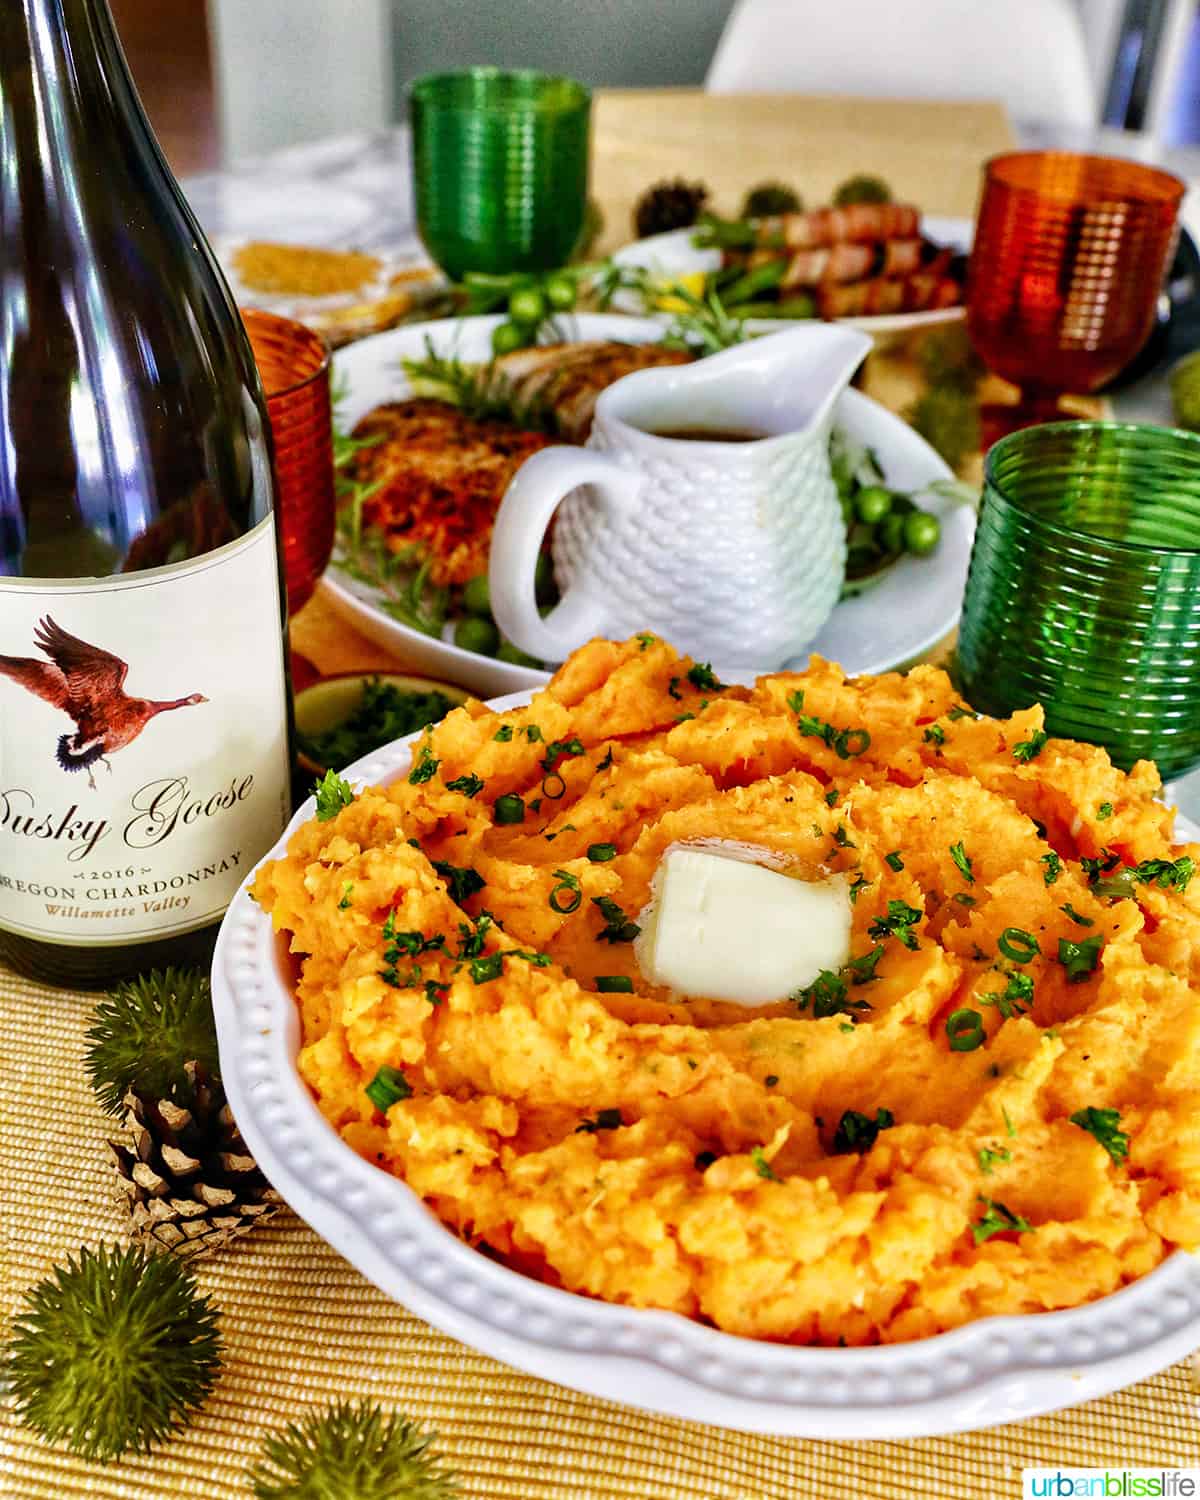 mashed sweet potatoes in a bowl in front of a bottle of dusky goose oregon Chardonnay and a table set for Thanksgiving.